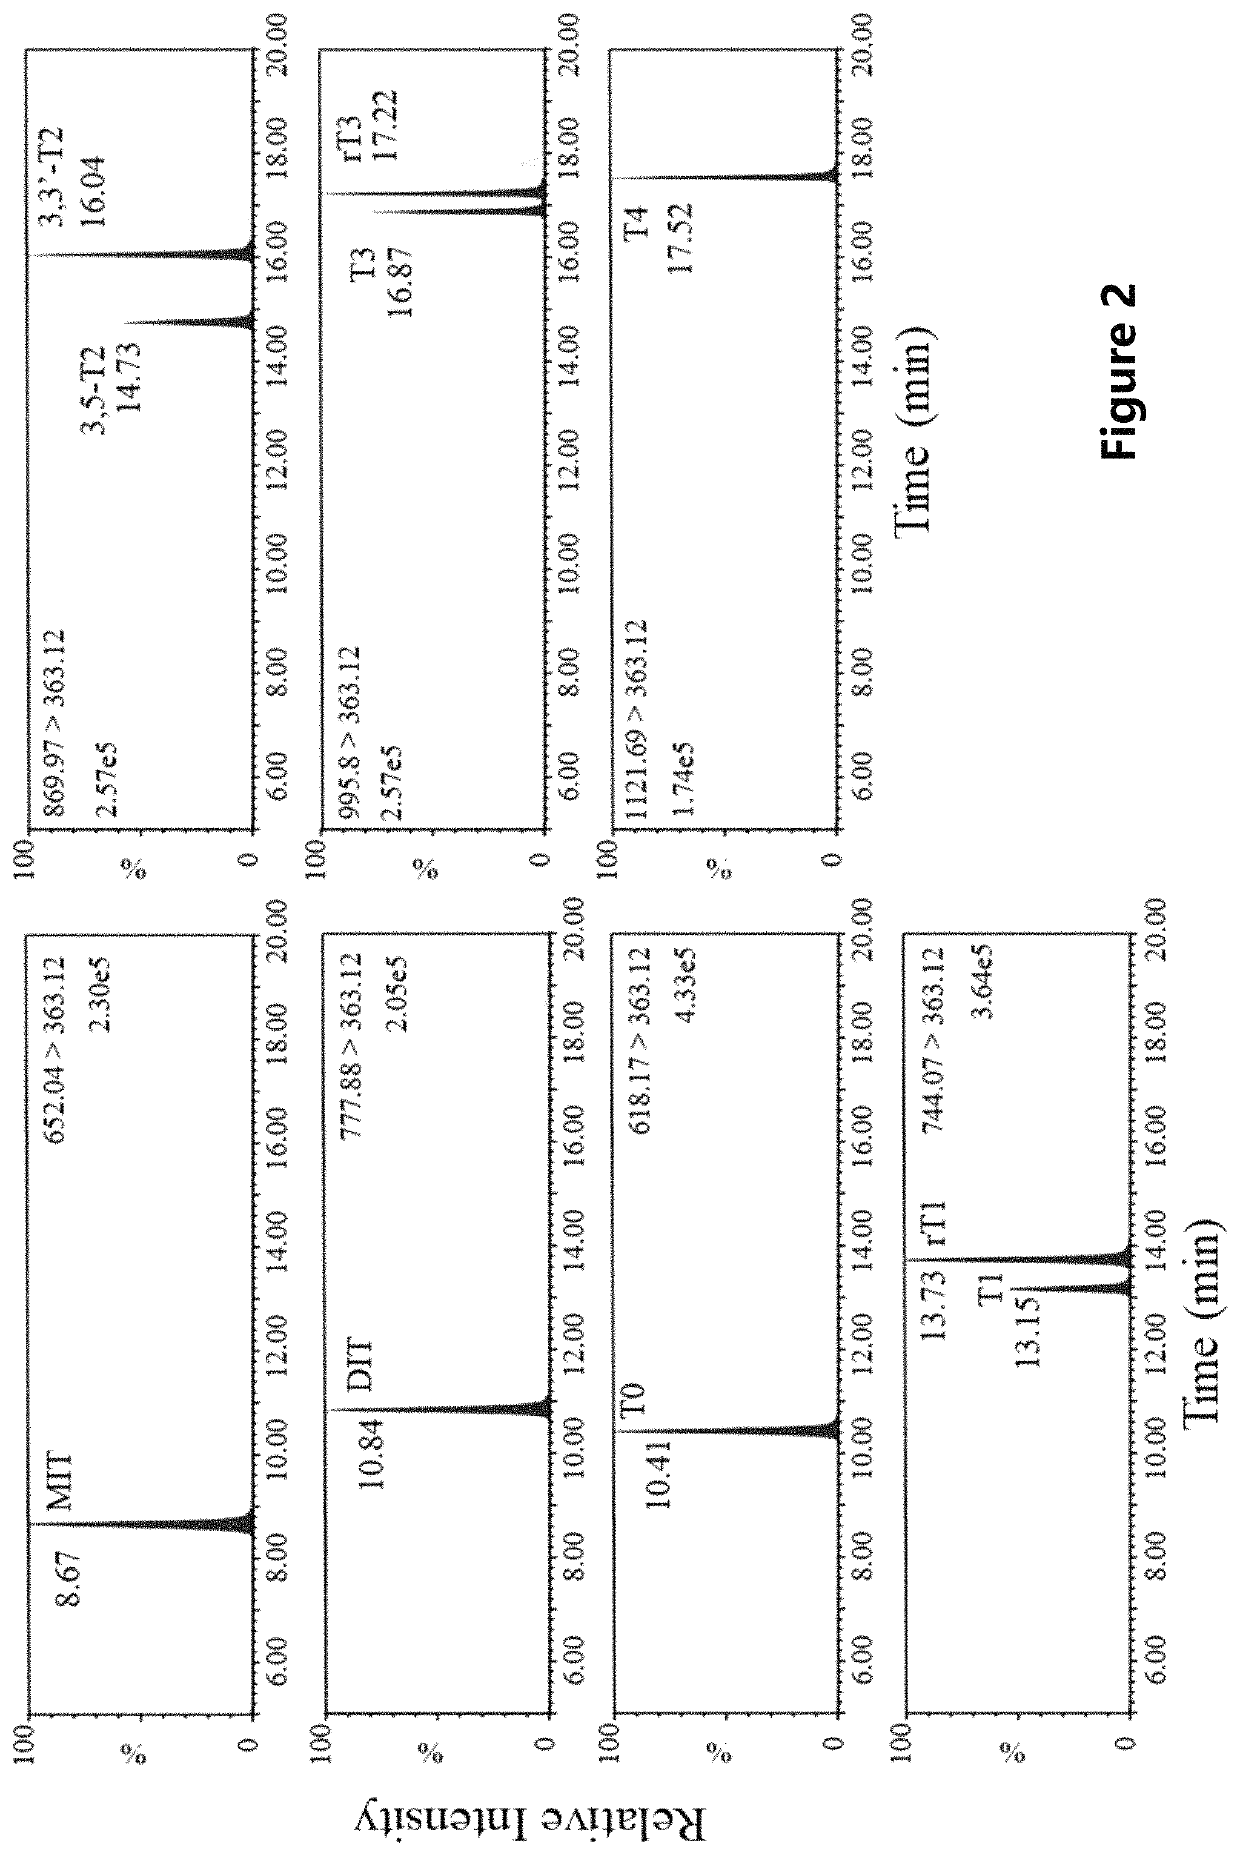 Method and a kit for simultaneous analyses of thyroid hormones and related metabolites in serum